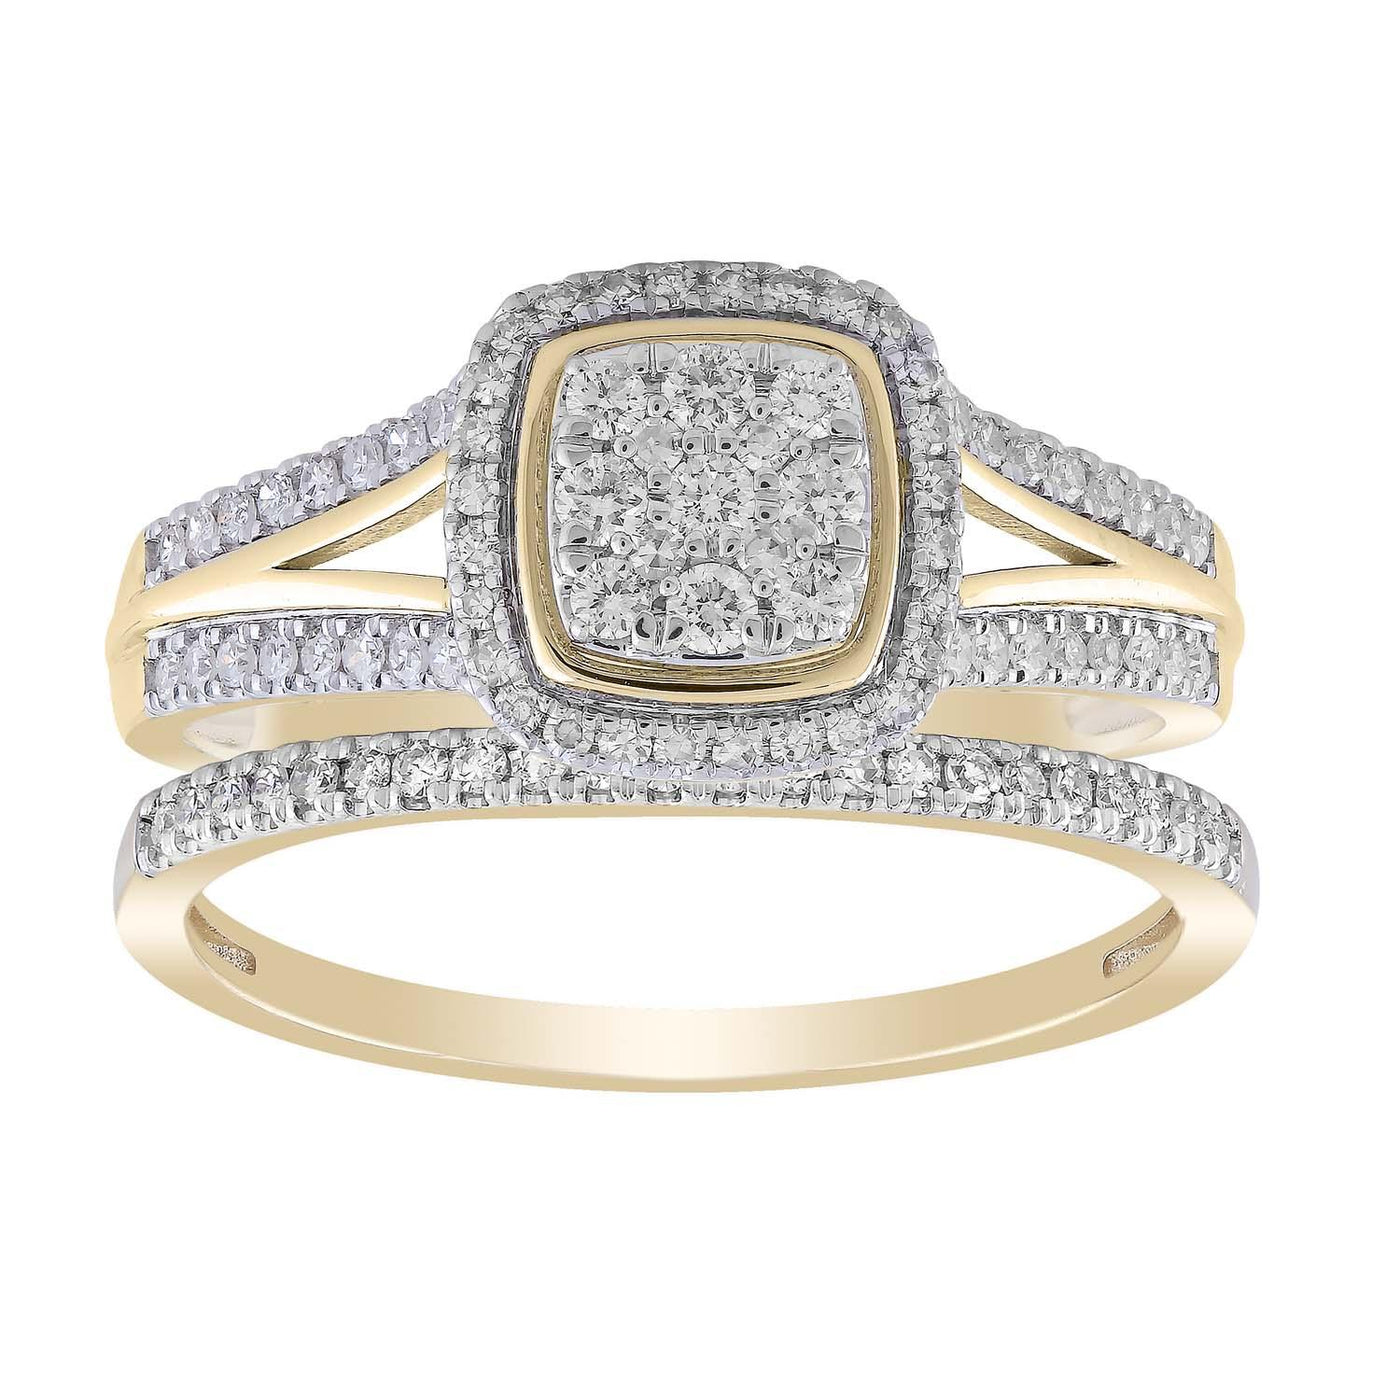 Say 'I do' with this beautiful diamond engagement & wedding ring set featuring 95 diamonds, a total diamond weight of 0.5 carats set in 9K yellow gold.